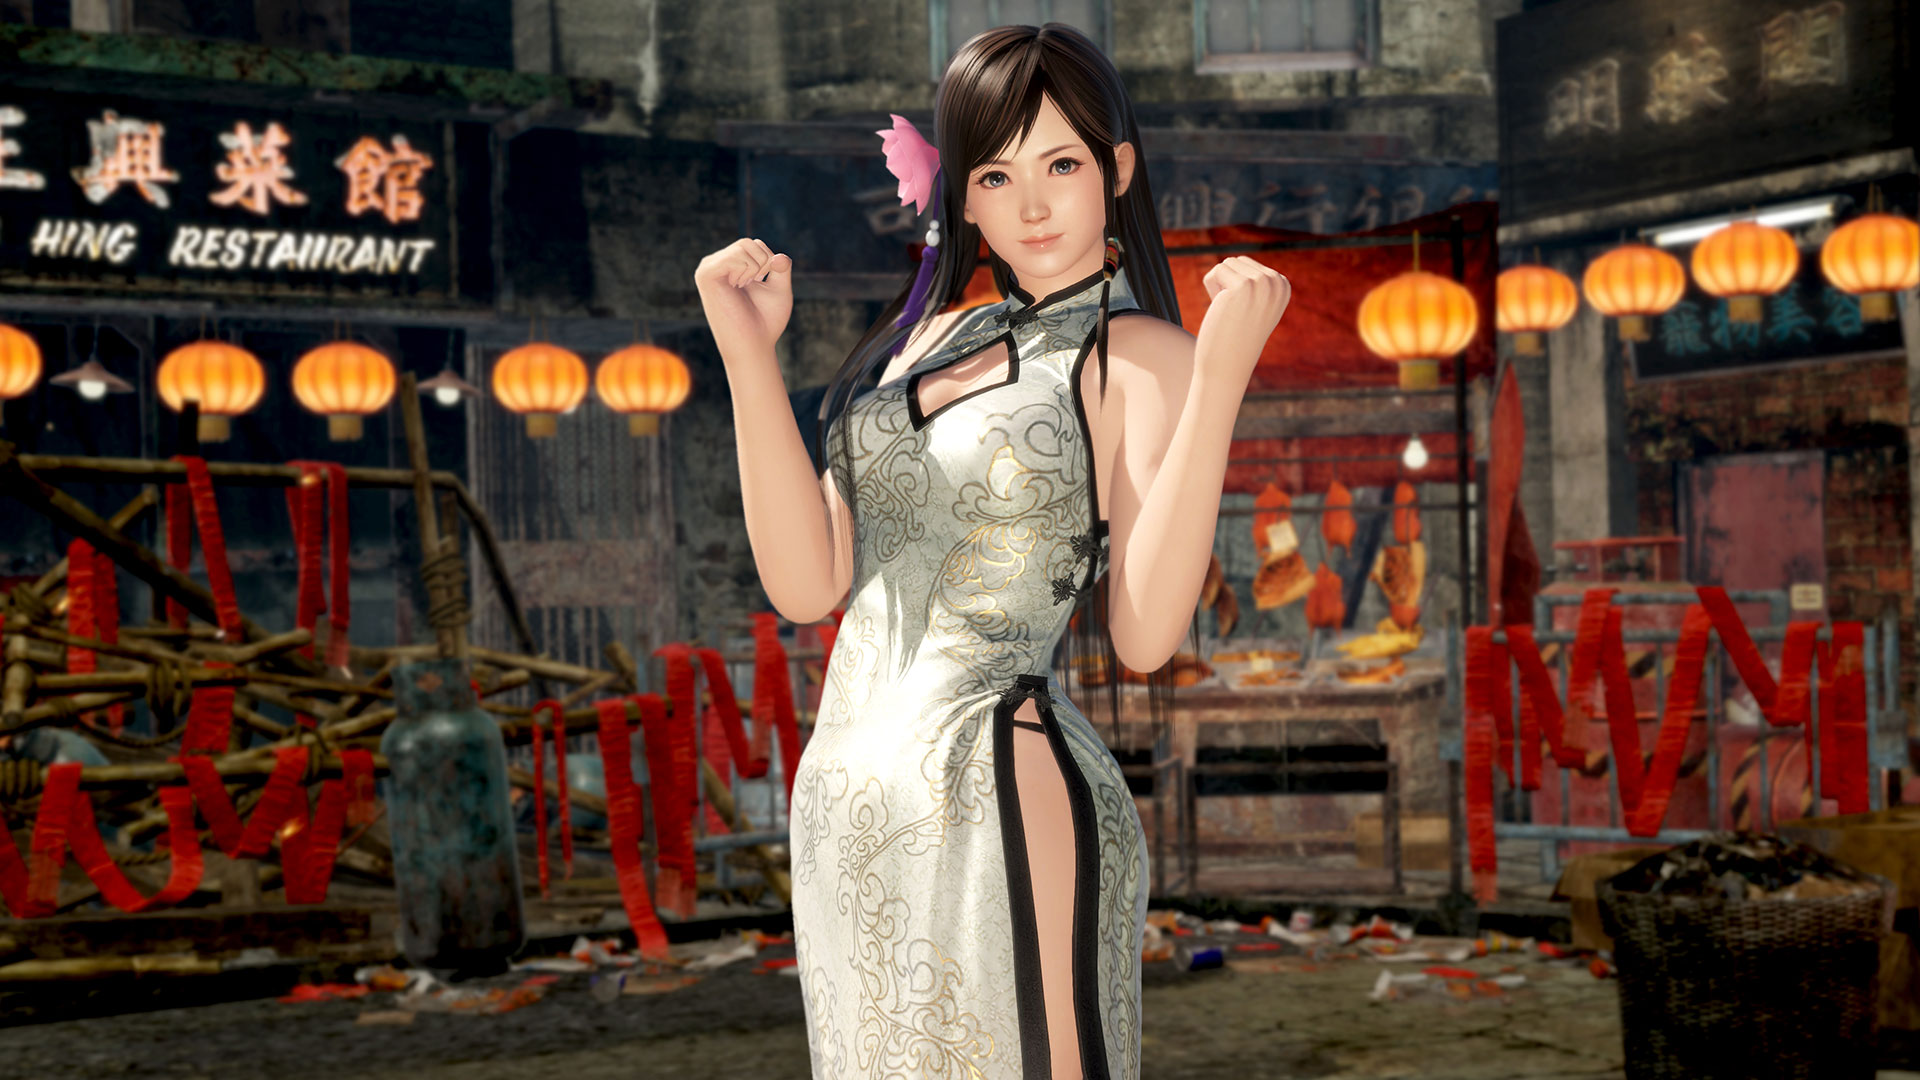 Video Game Dead or Alive 6 HD Wallpaper | Background Image